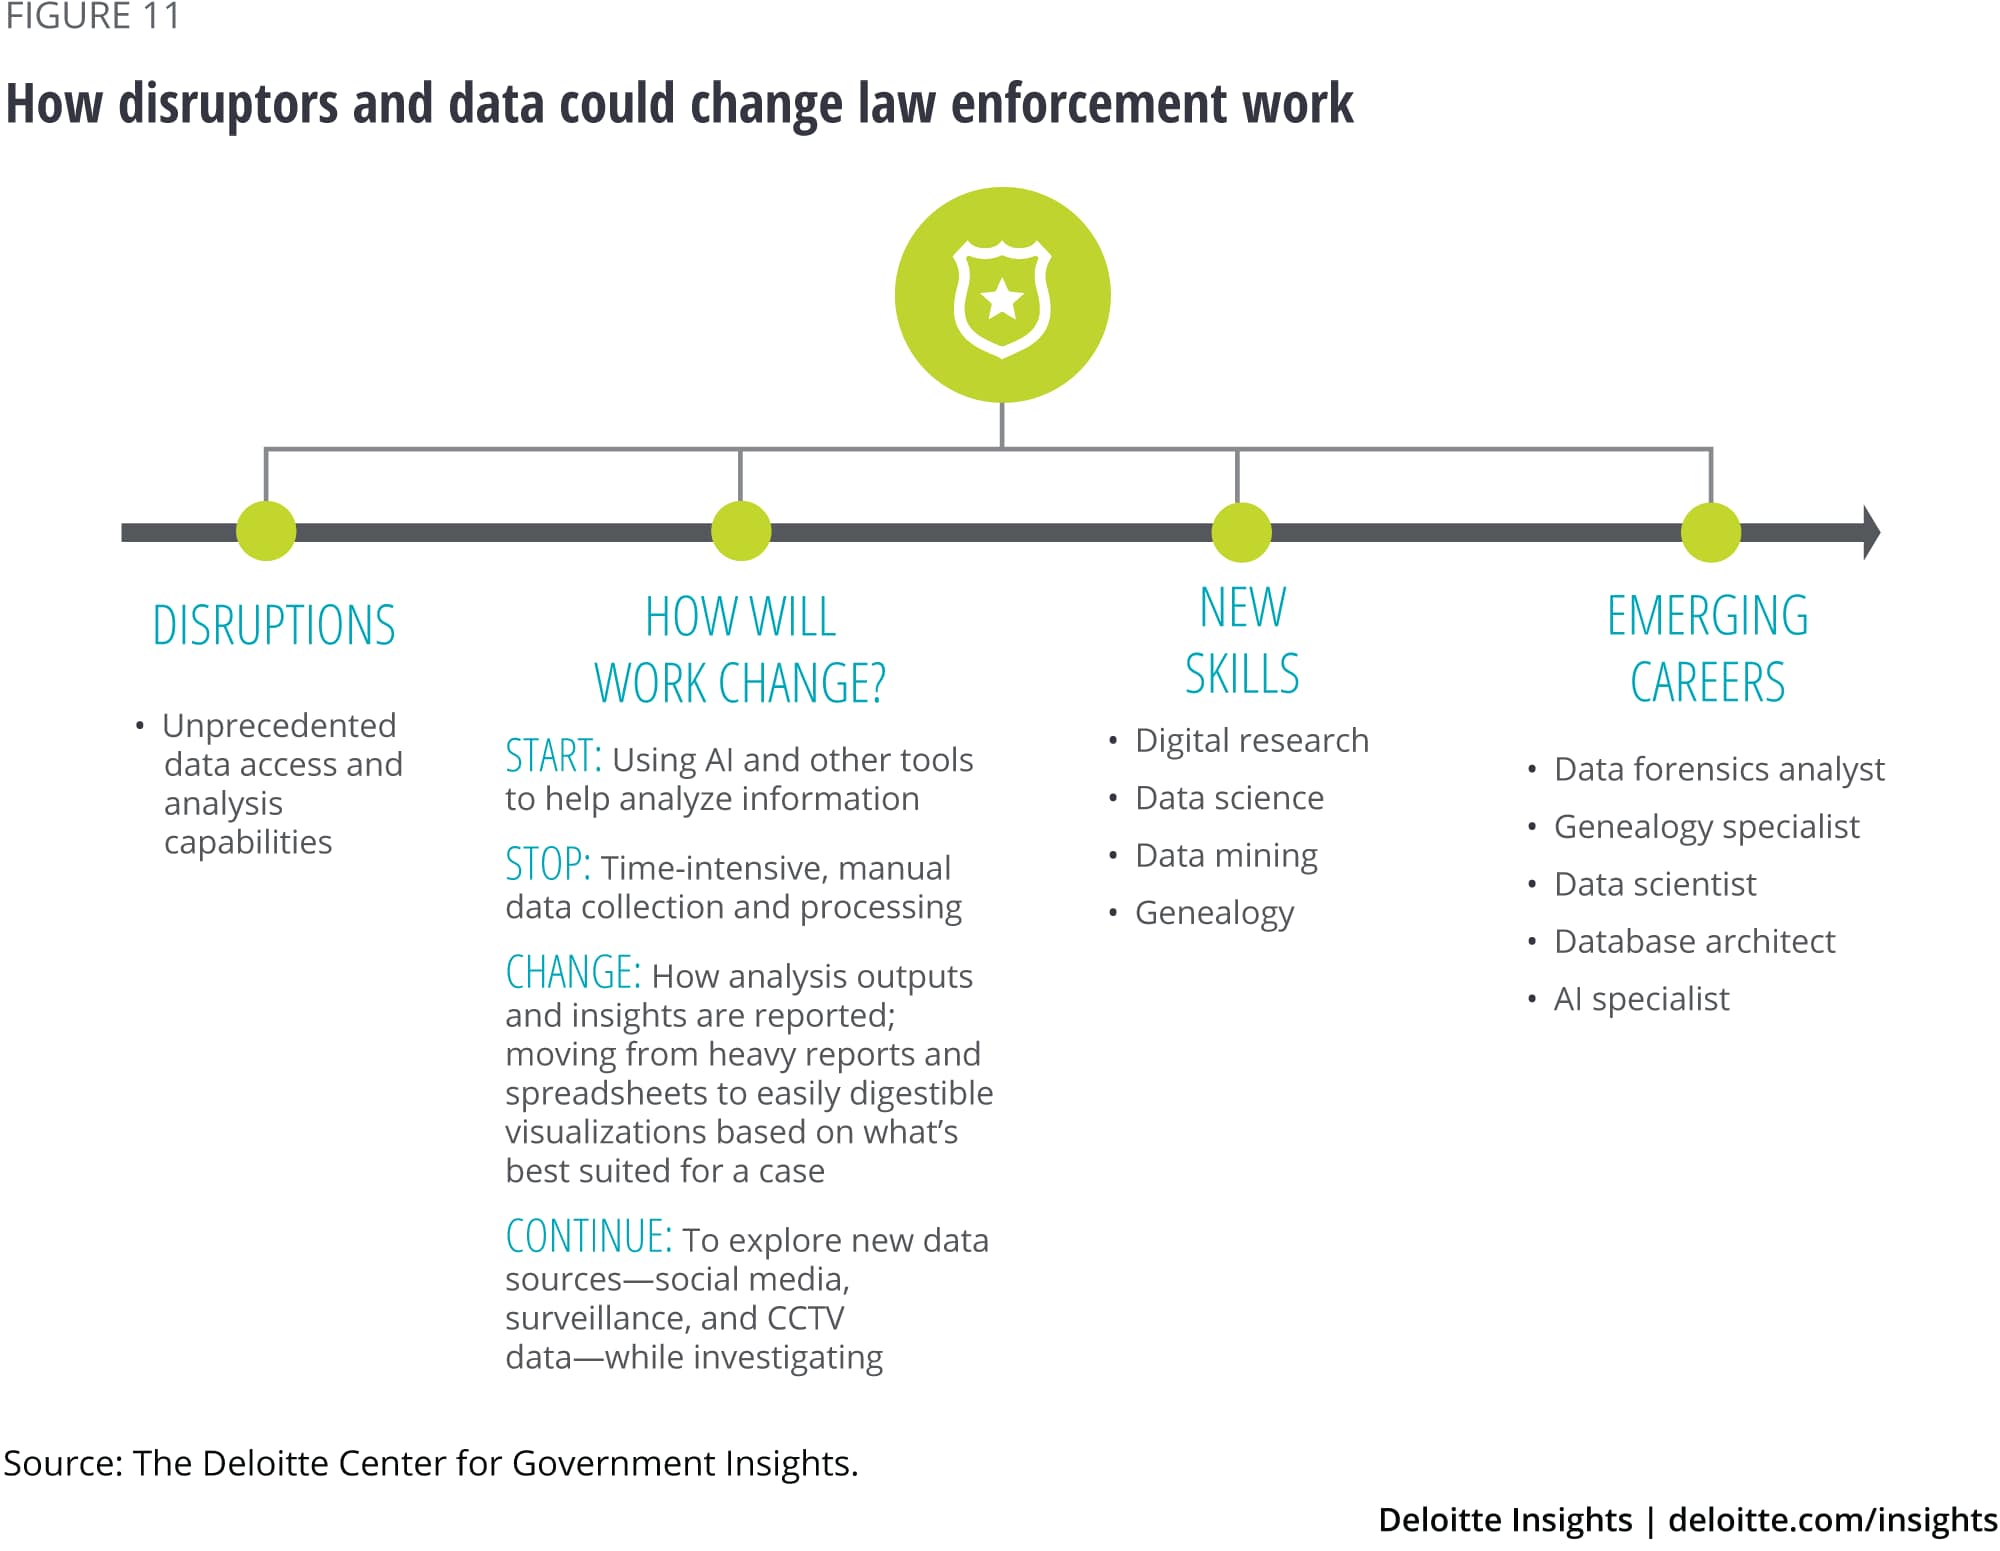 How disruptors and data could change law enforcement work